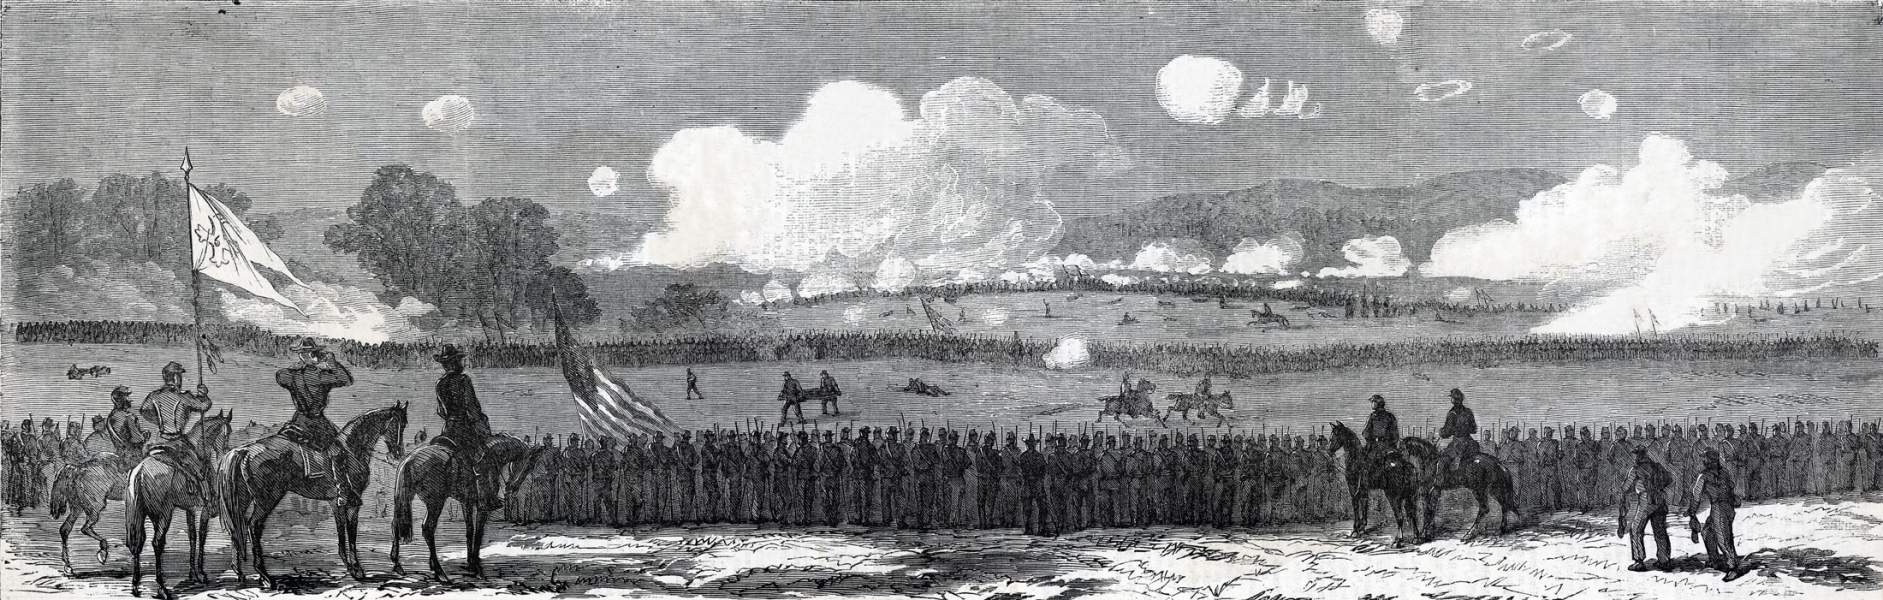 Union Army's Sixth Corps at the Third Battle of Winchester, Virginia, September 19, 1864, artist's impression, zoomable image